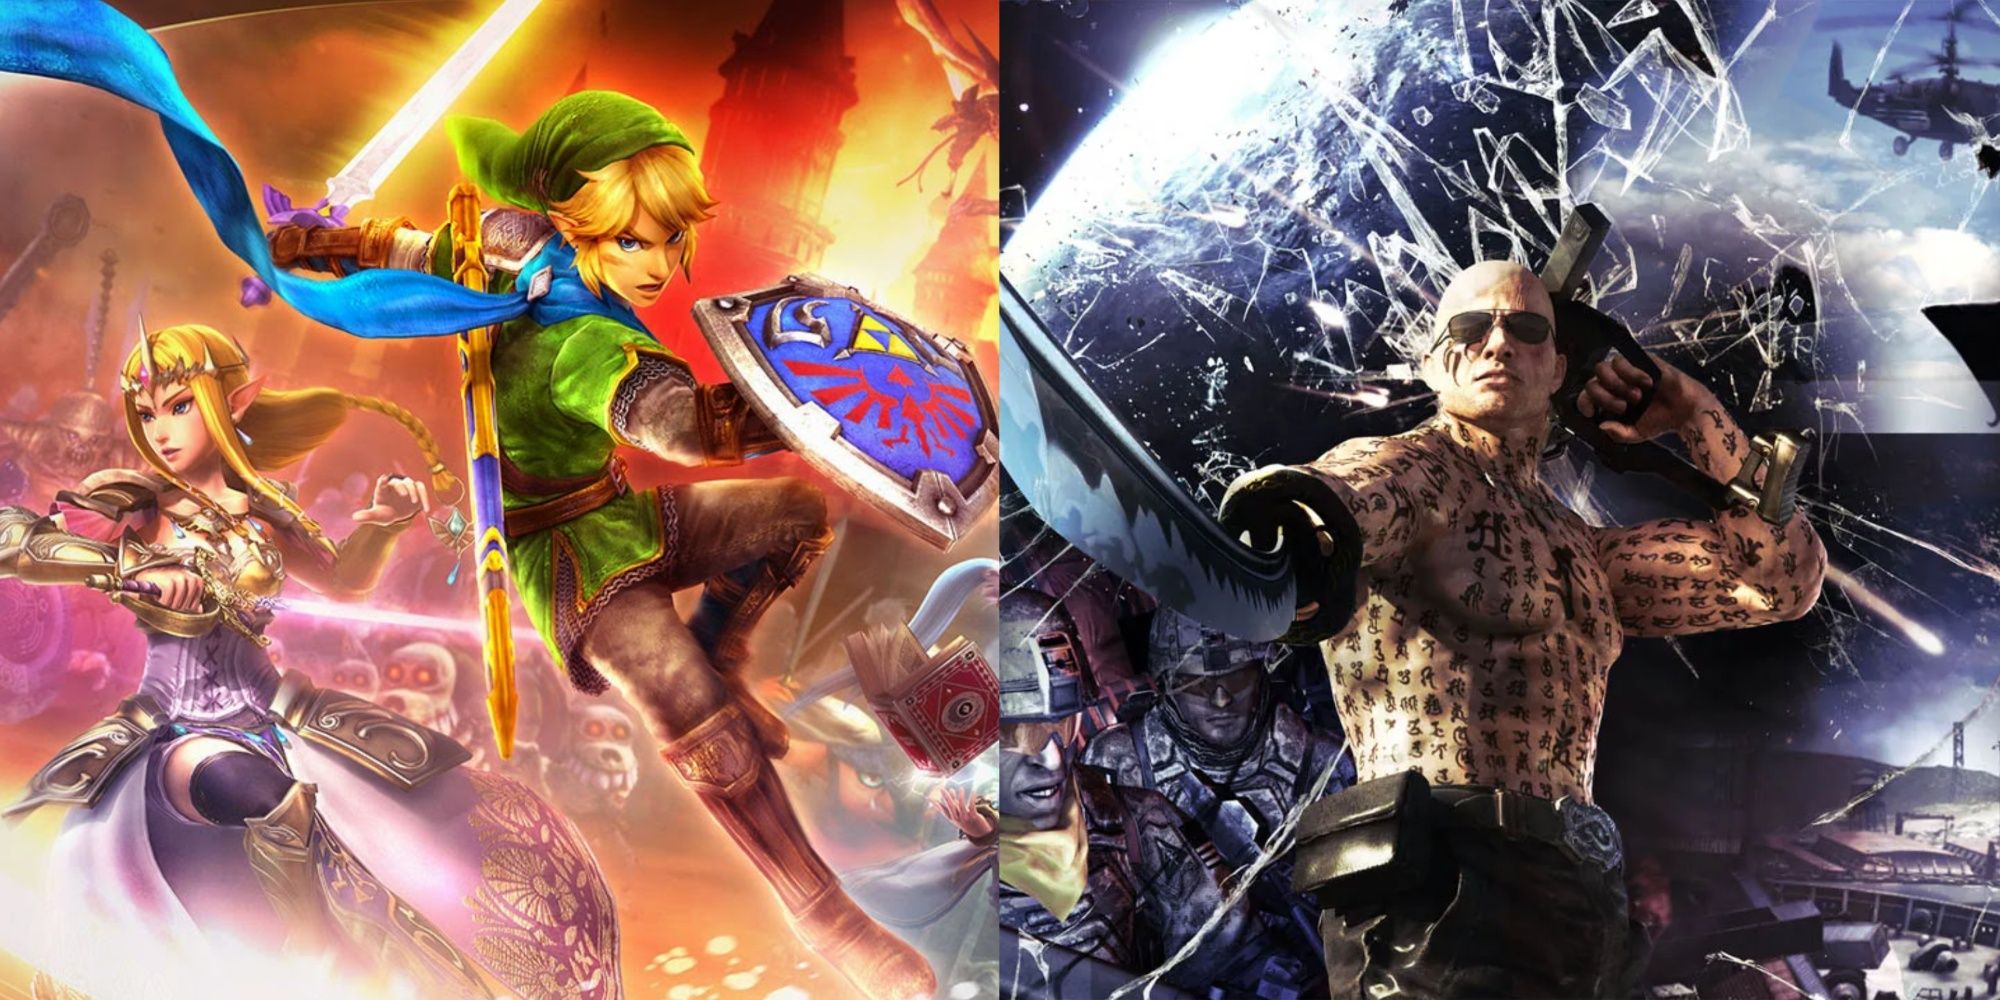 Box art to Hyrule Warriors and Devil's Third.